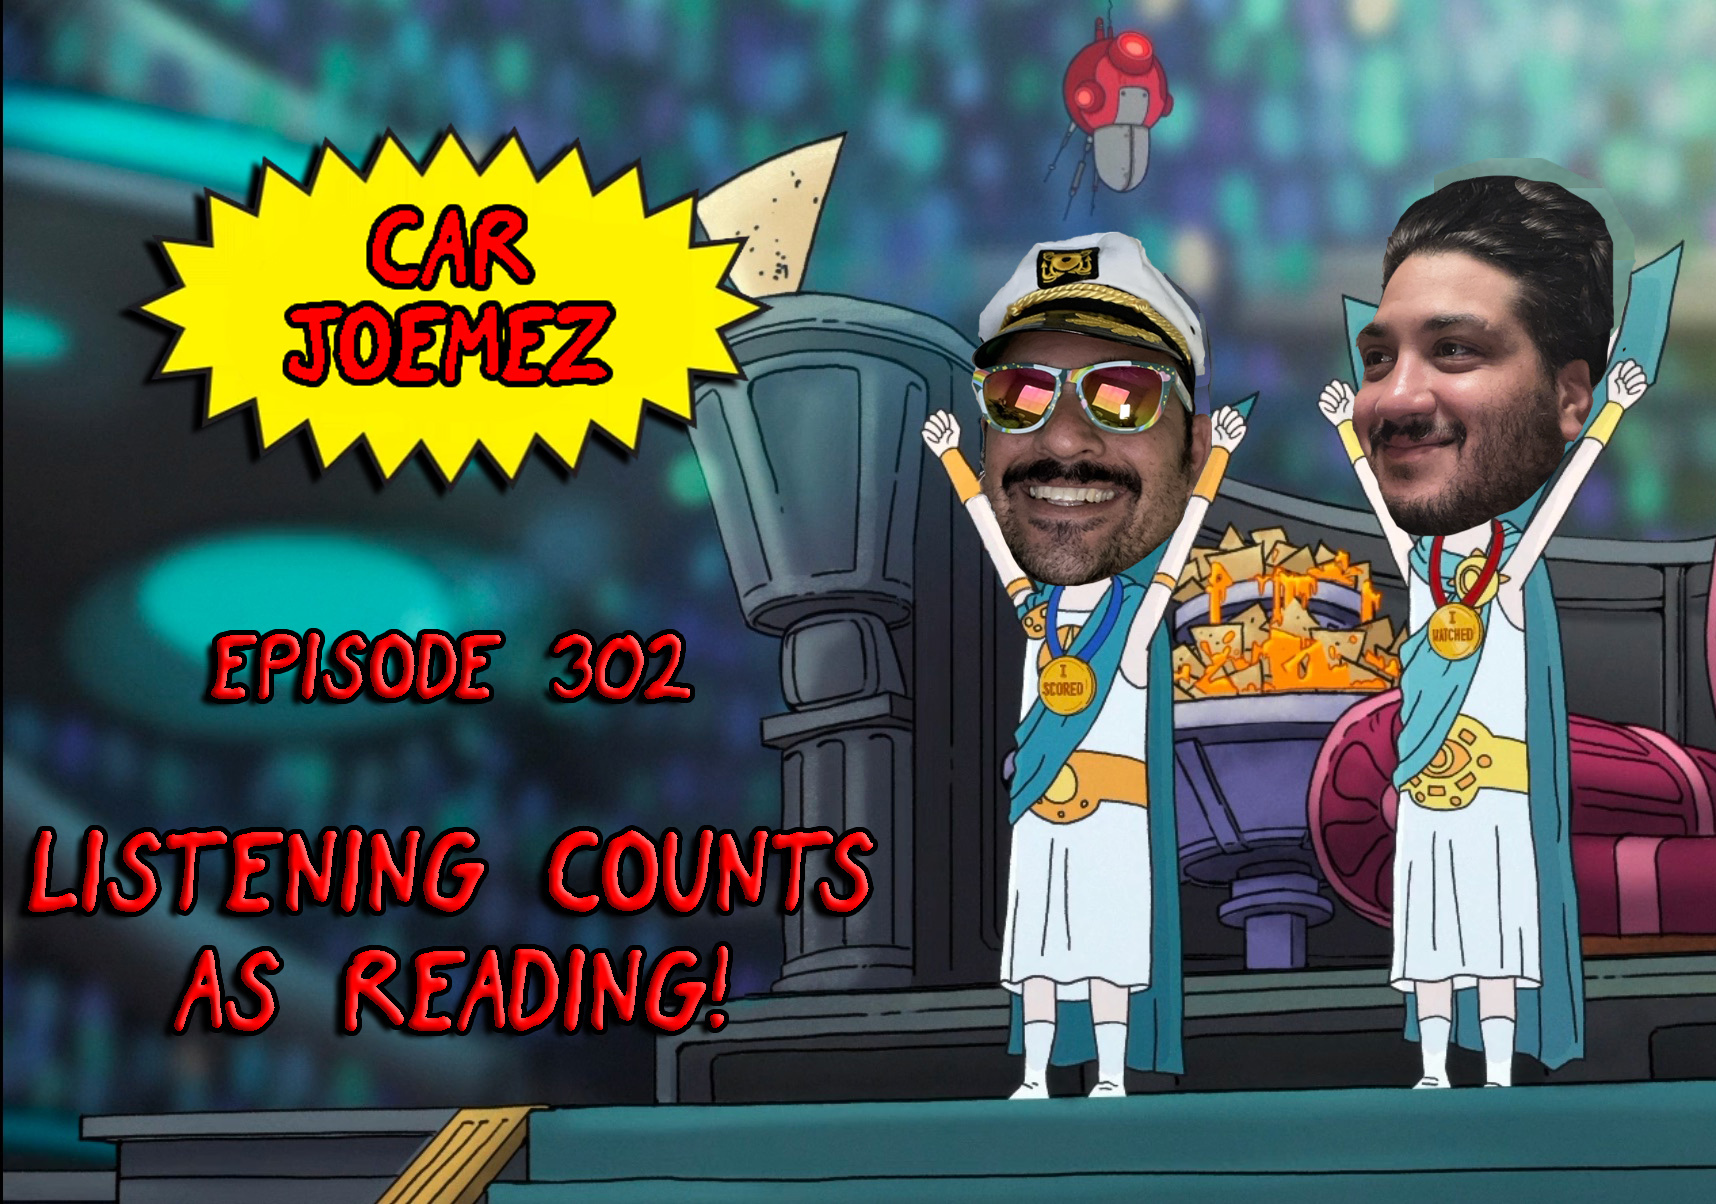 Episode 302: Listening Counts As Reading!